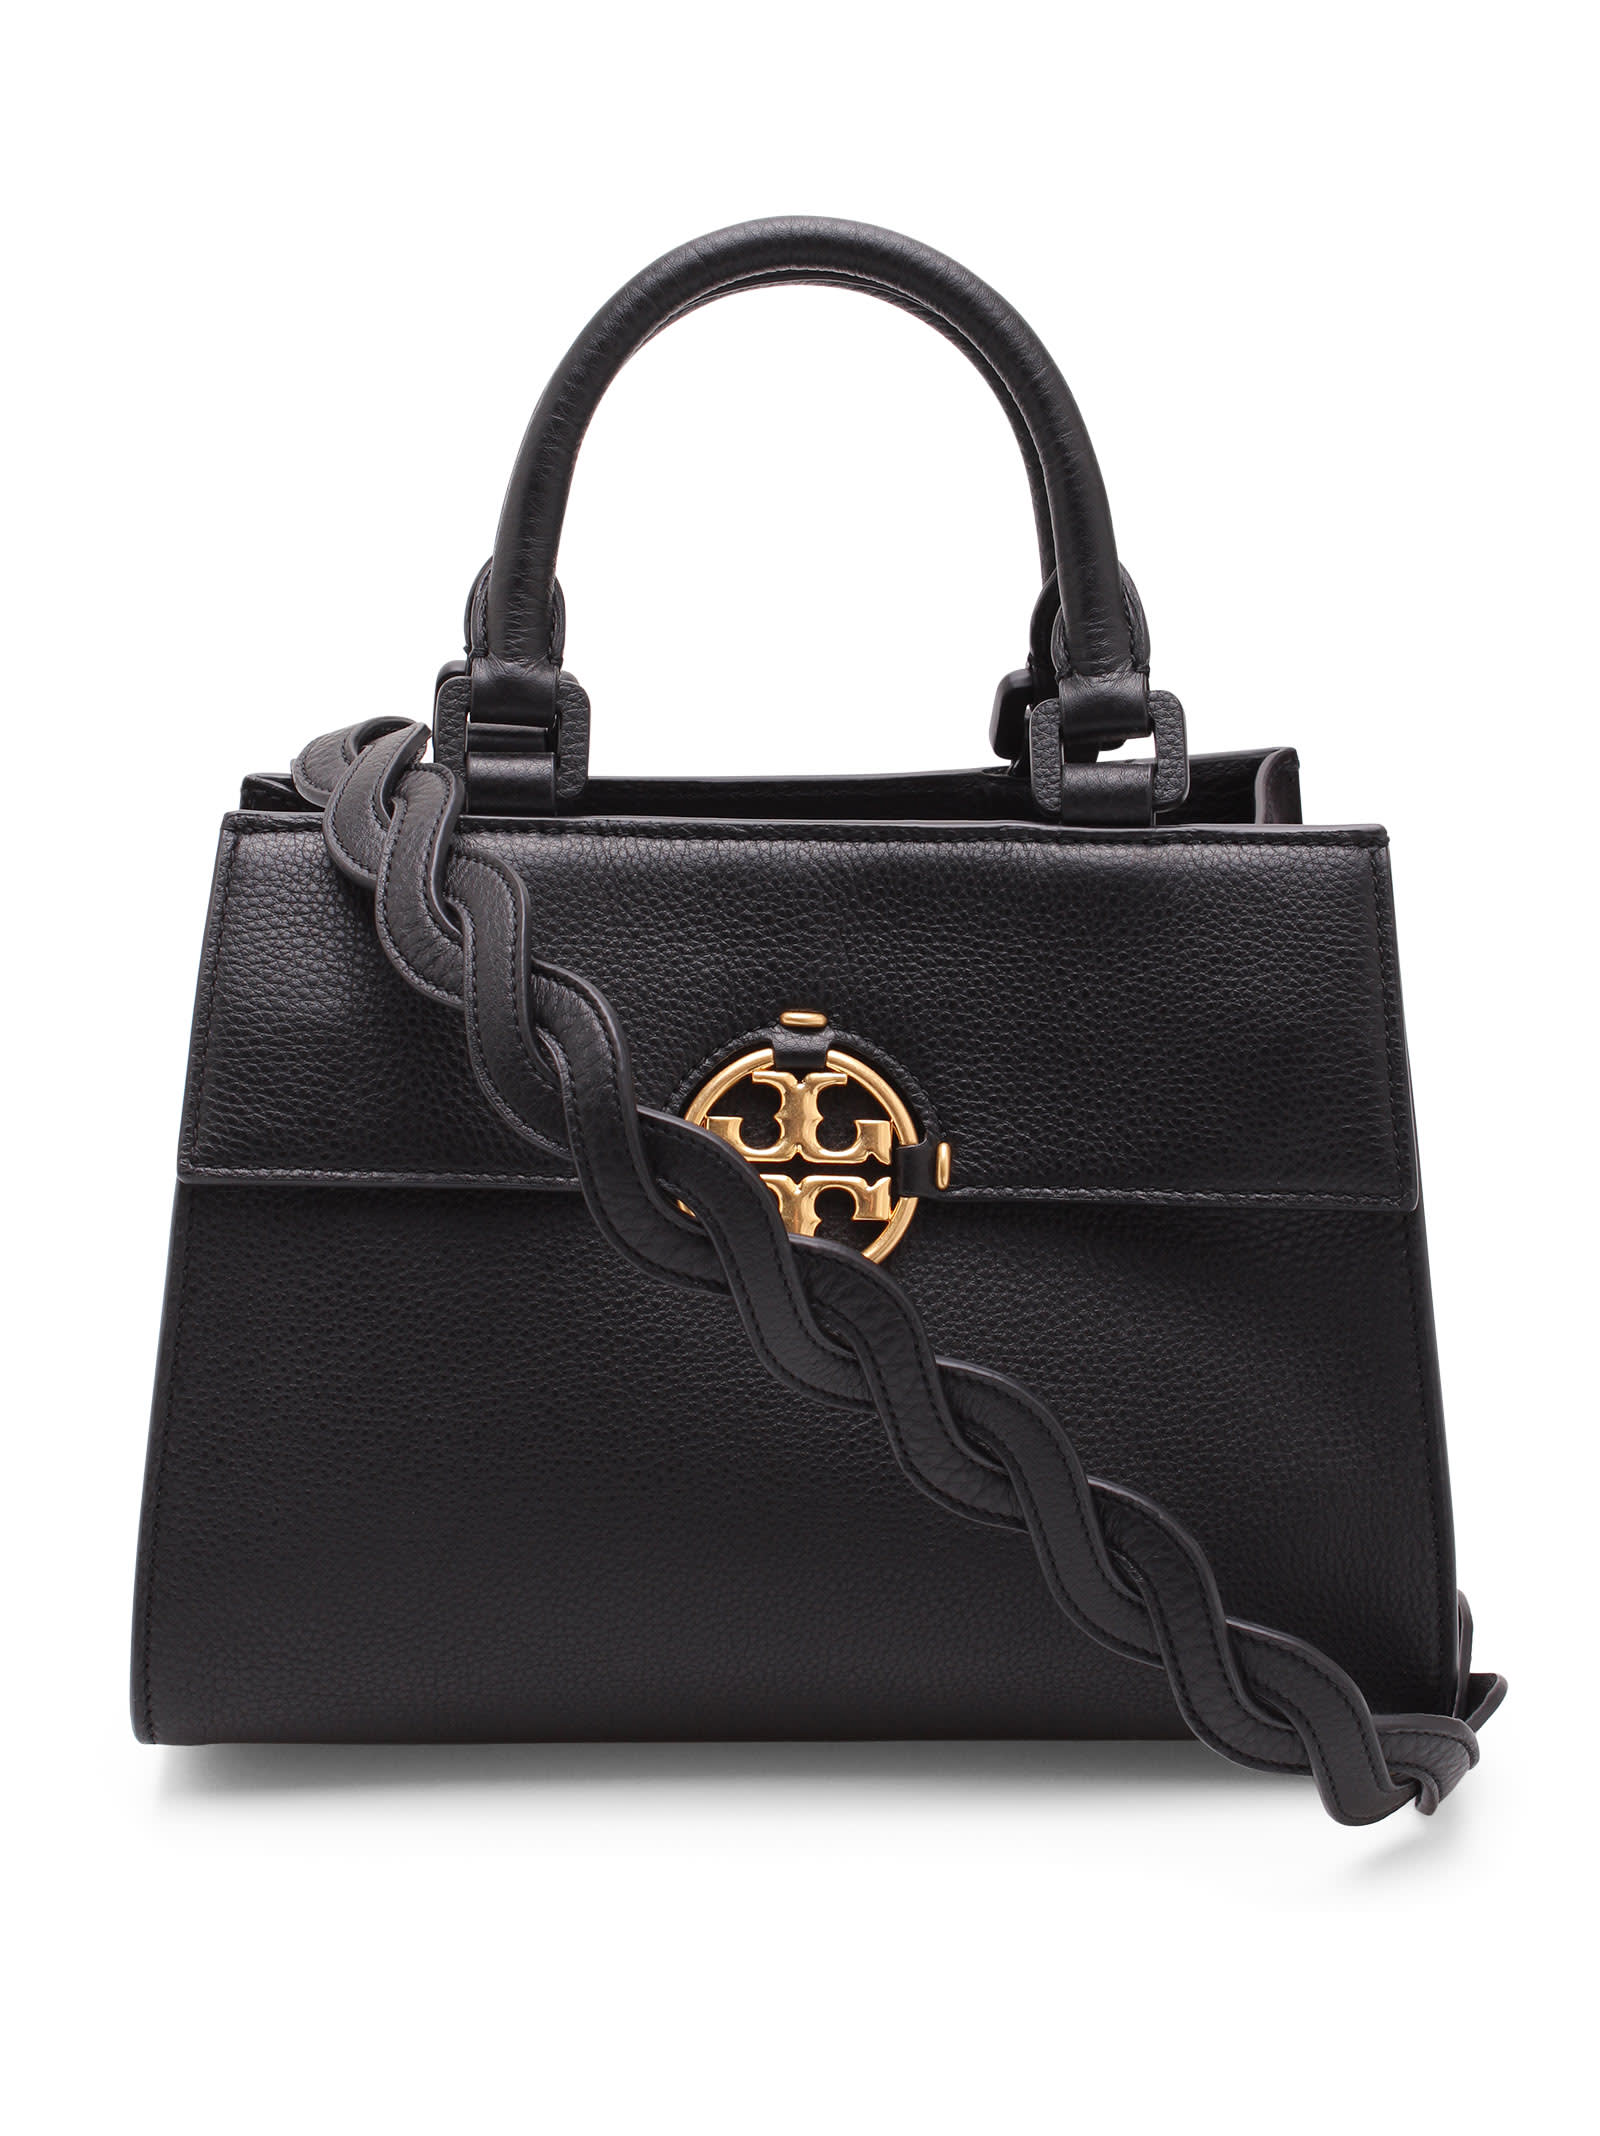 Tory Burch Miller Leather Tote Bag In Black